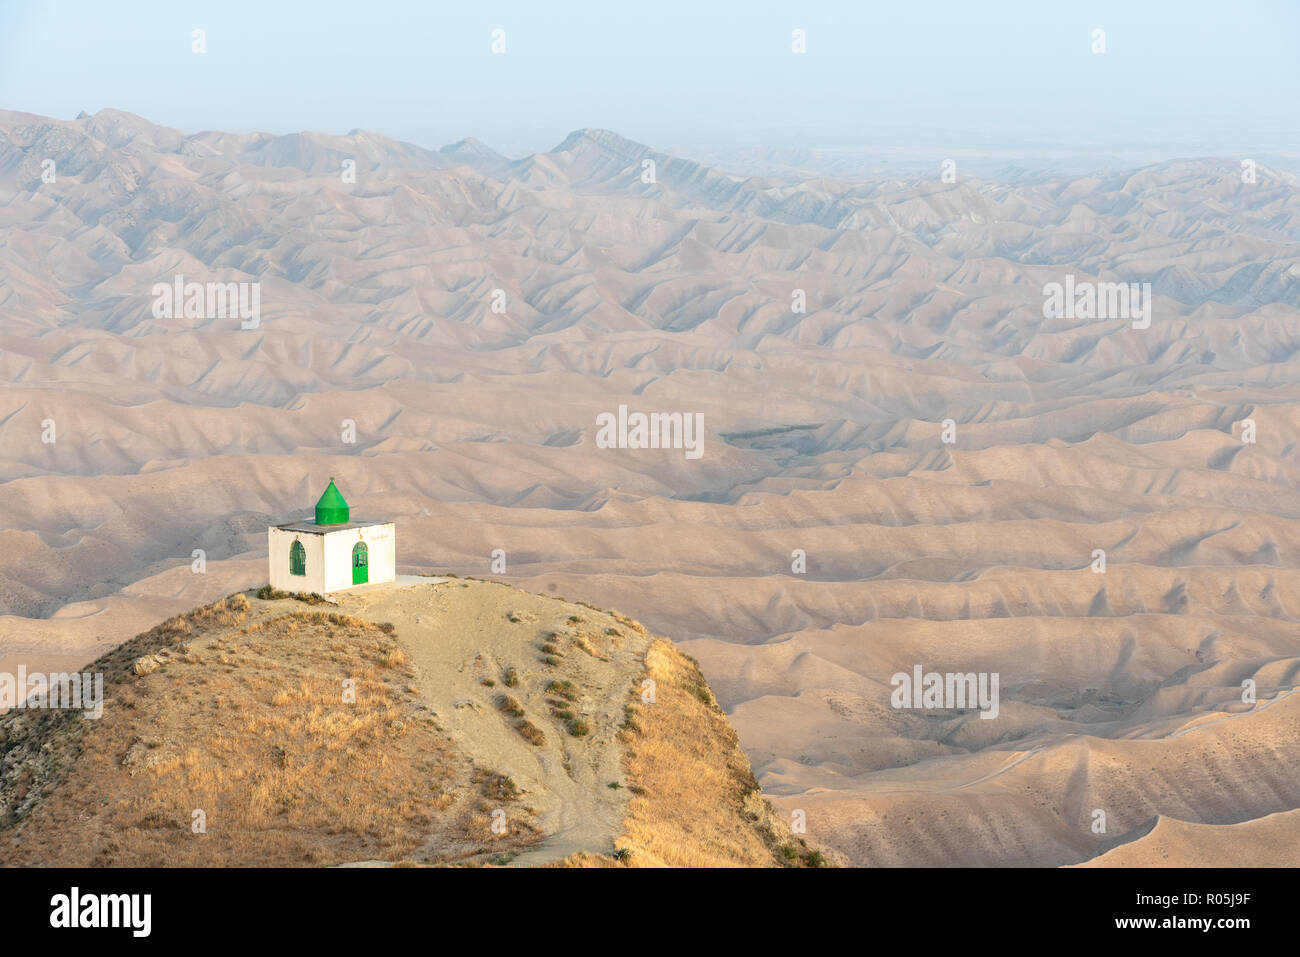 Tomb of Khaled Nabi, situated in the Gokcheh Dagh hills of the Turkmen Sahra in Golestan, Northern Iran Stock Photo